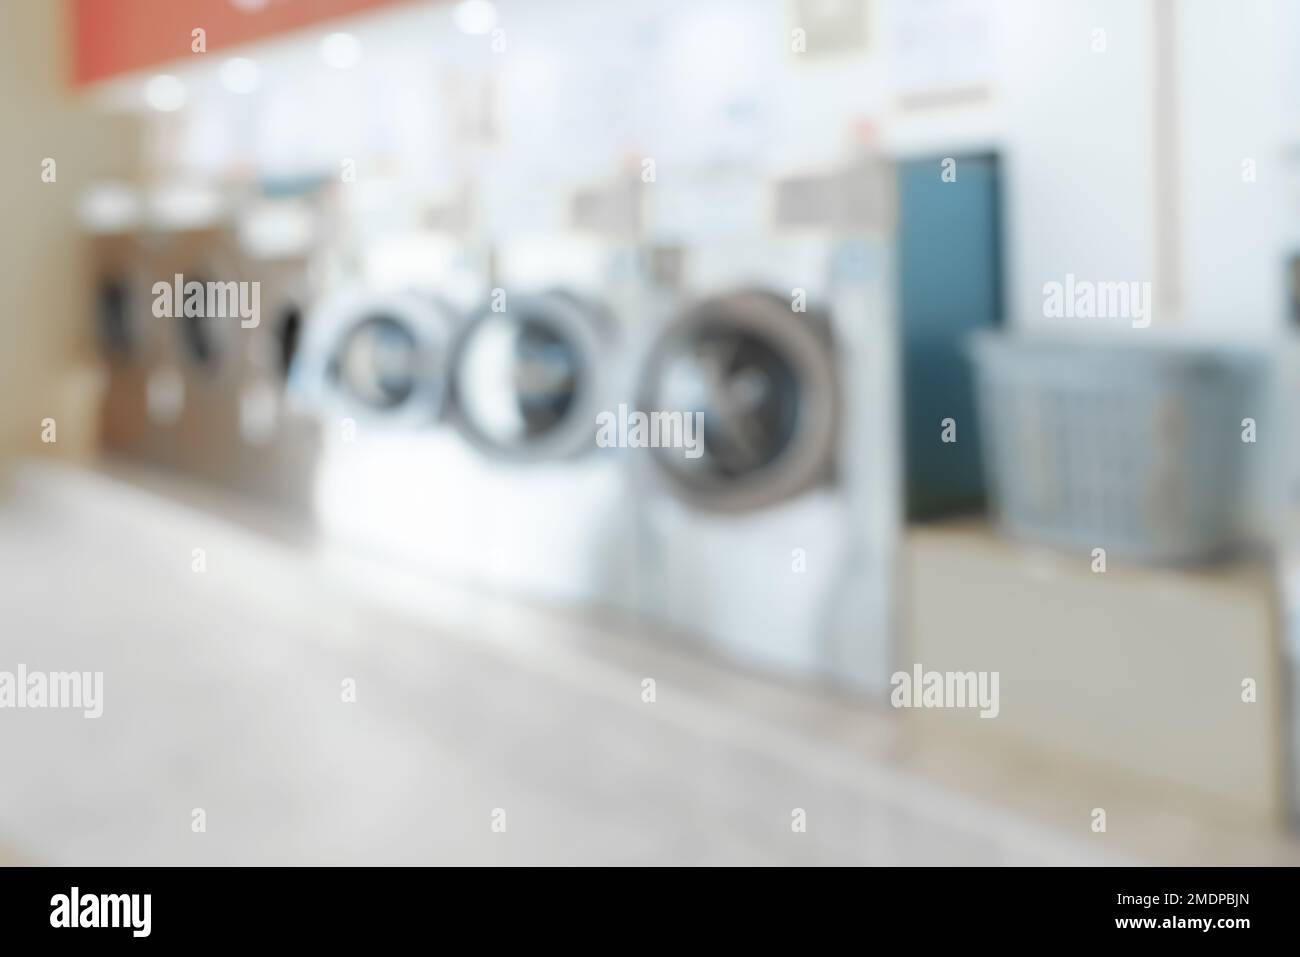 Blur background of of qualified coin-operated washing machines in a public store. Concept of a self service commercial laundry and drying machine in a Stock Photo